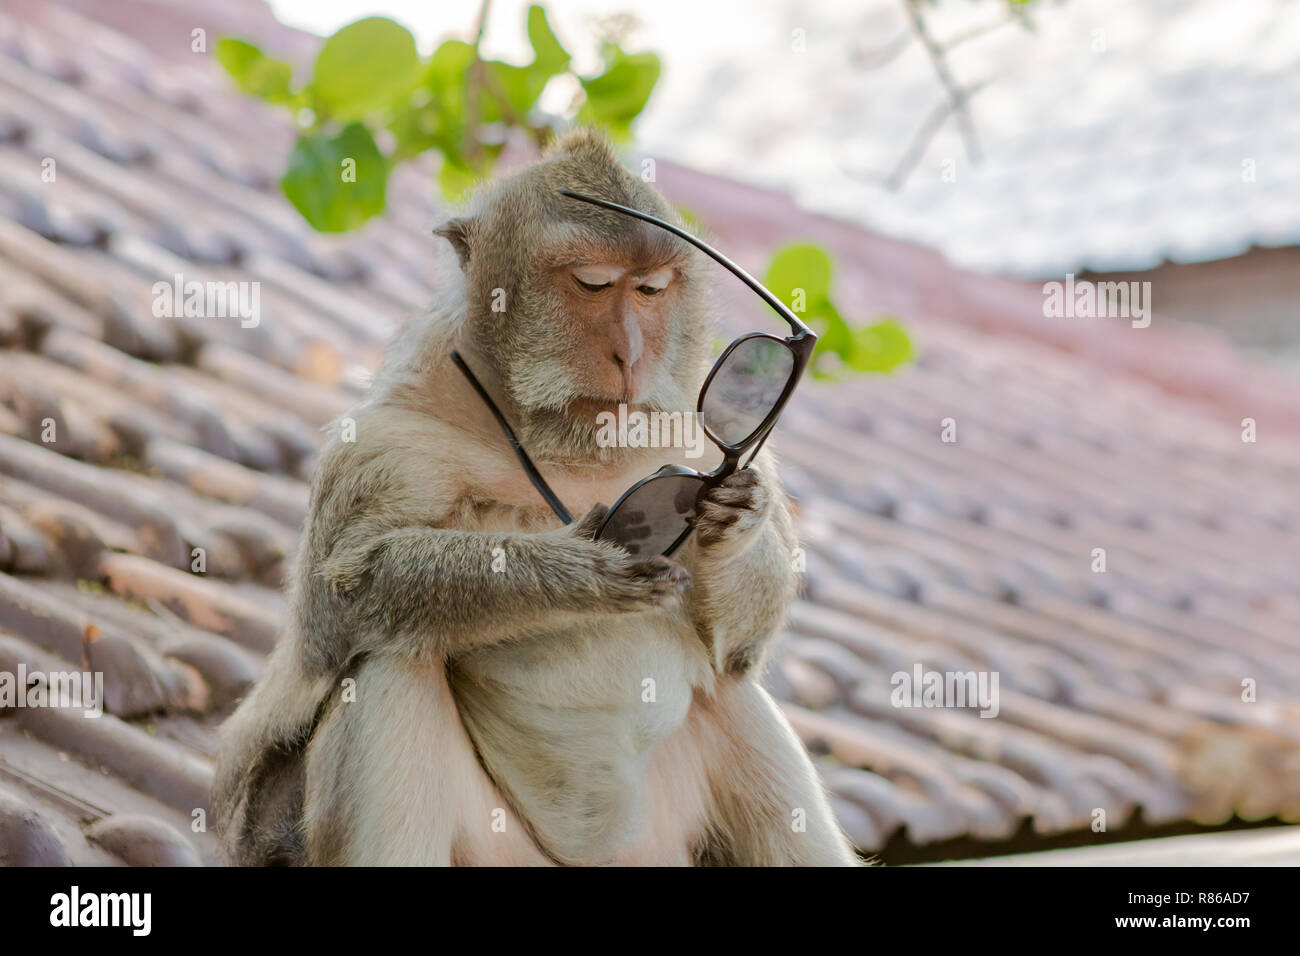 Monkey Trying to Figure Out the Use of a Pair of Sunglasses in Bali, Indonesia Stock Photo